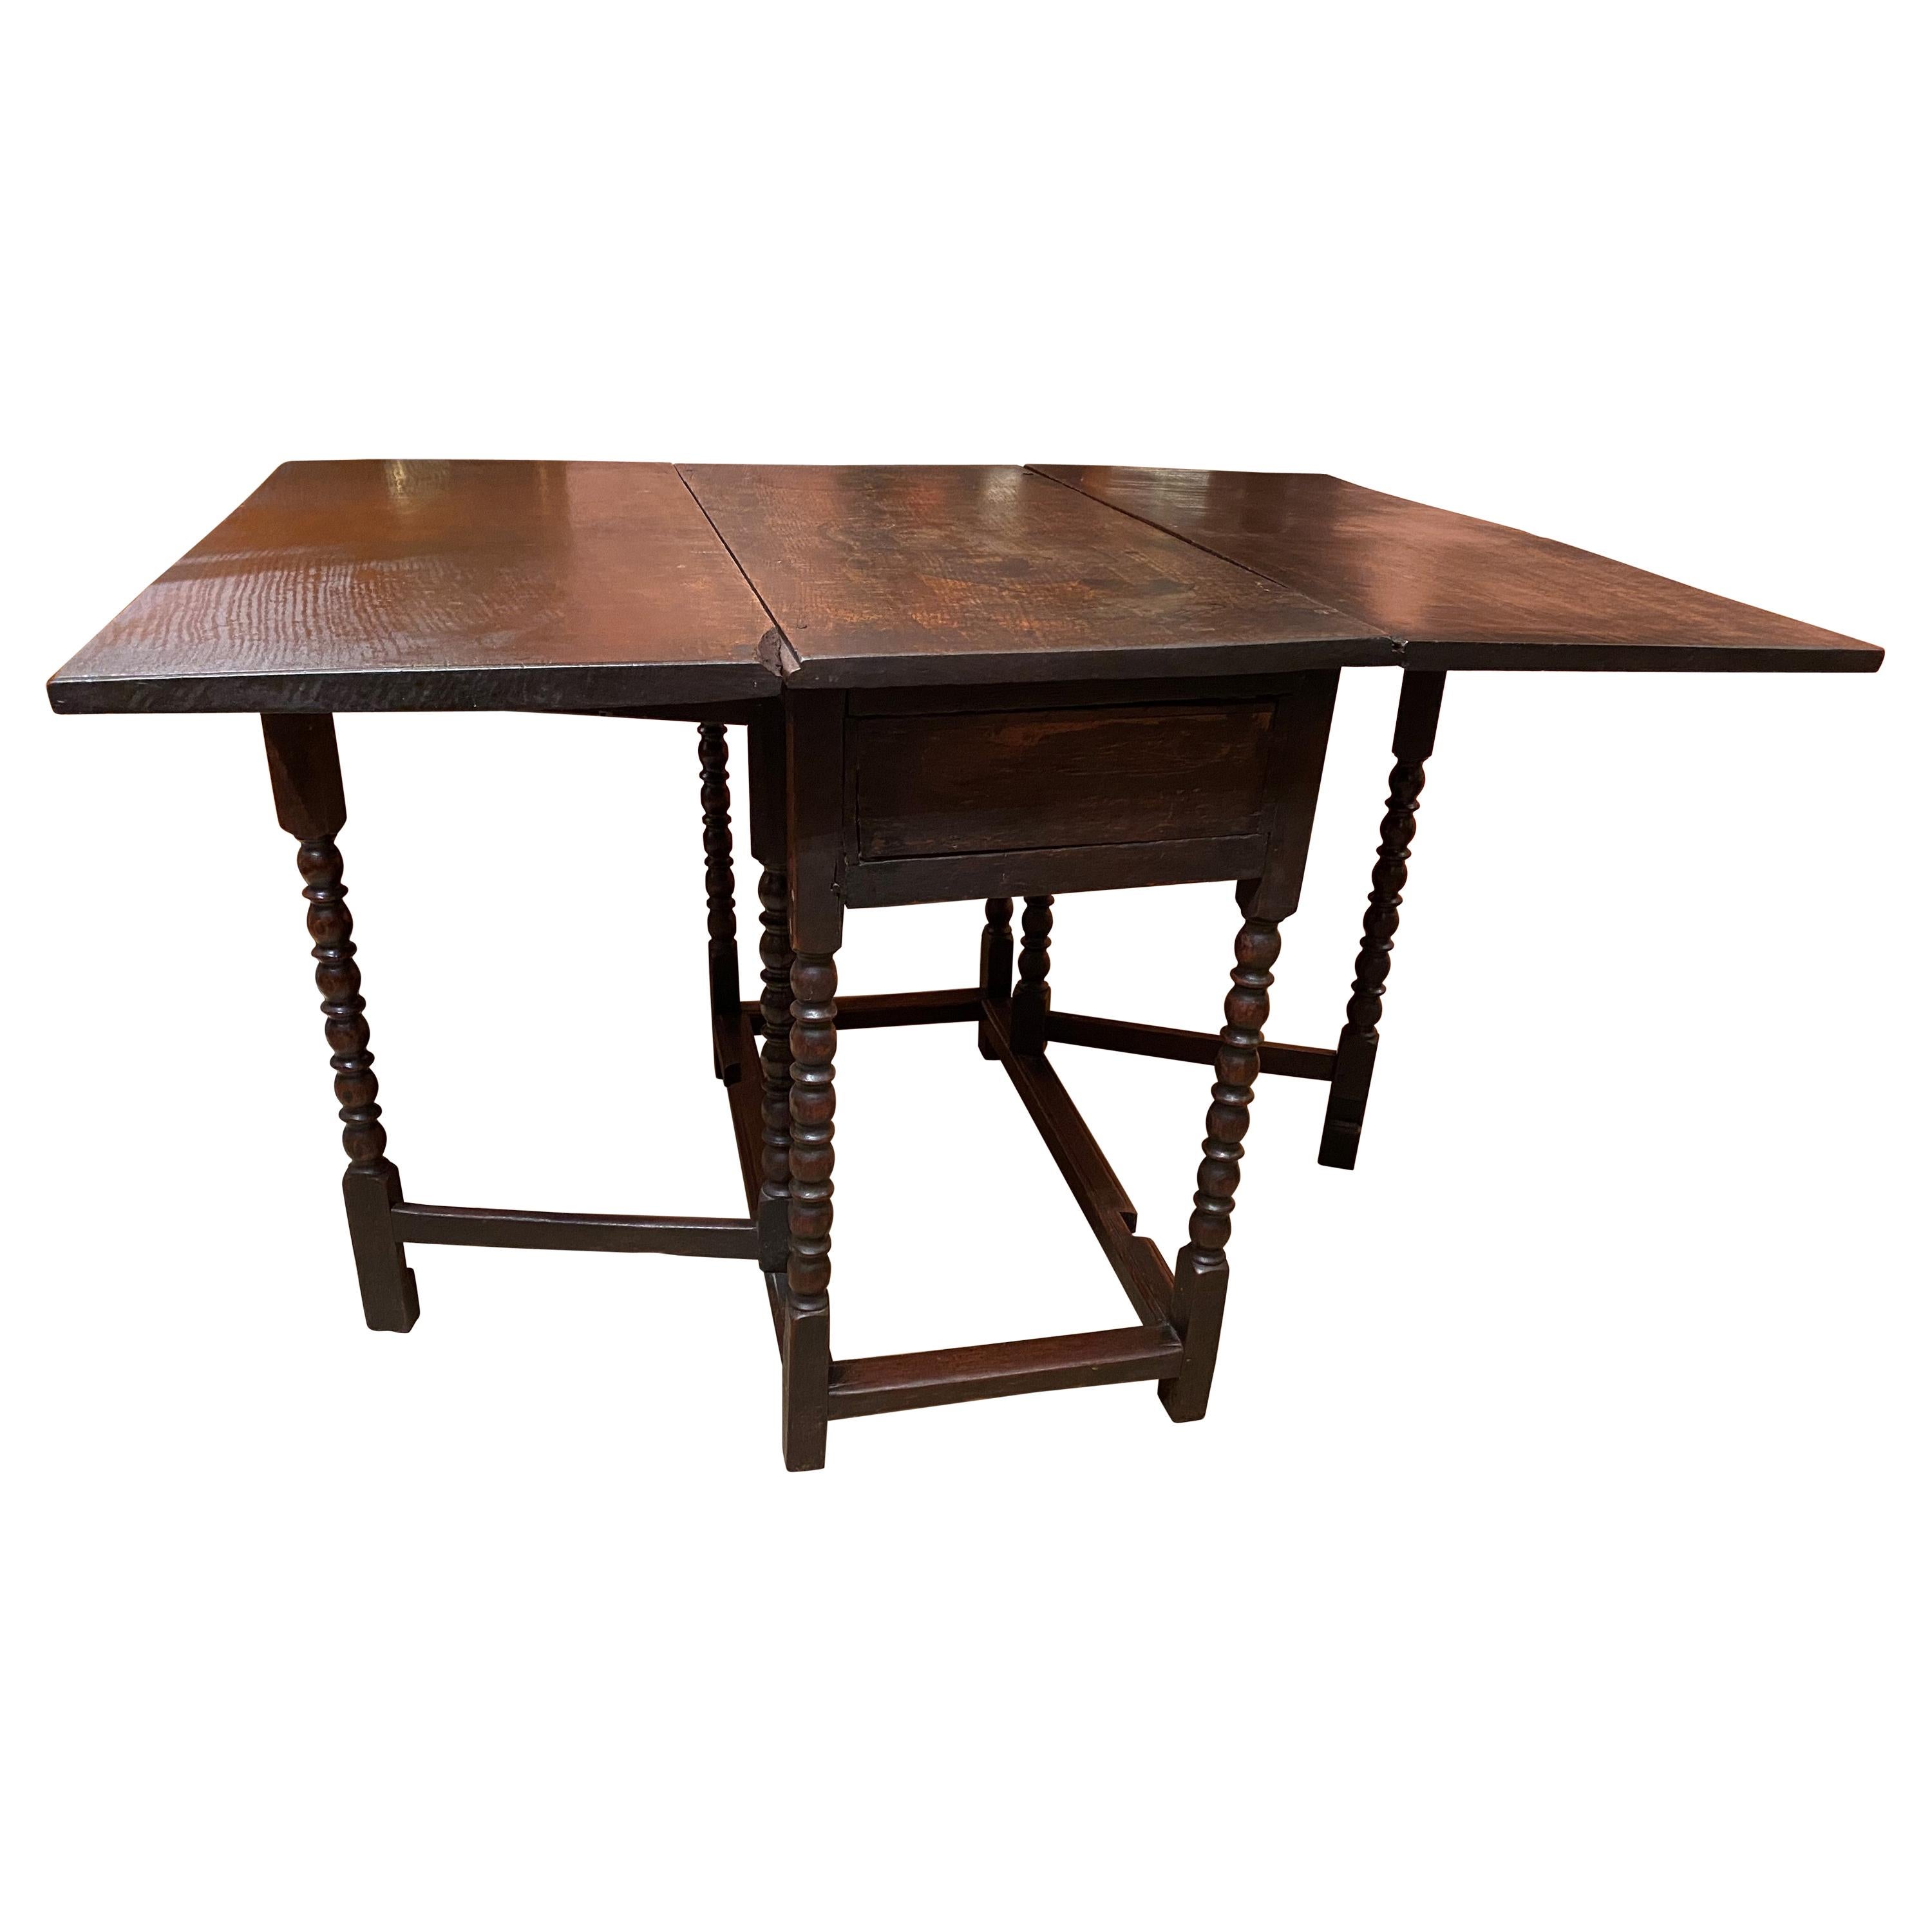 18th Century English Oak Gateleg Table with Great Surface